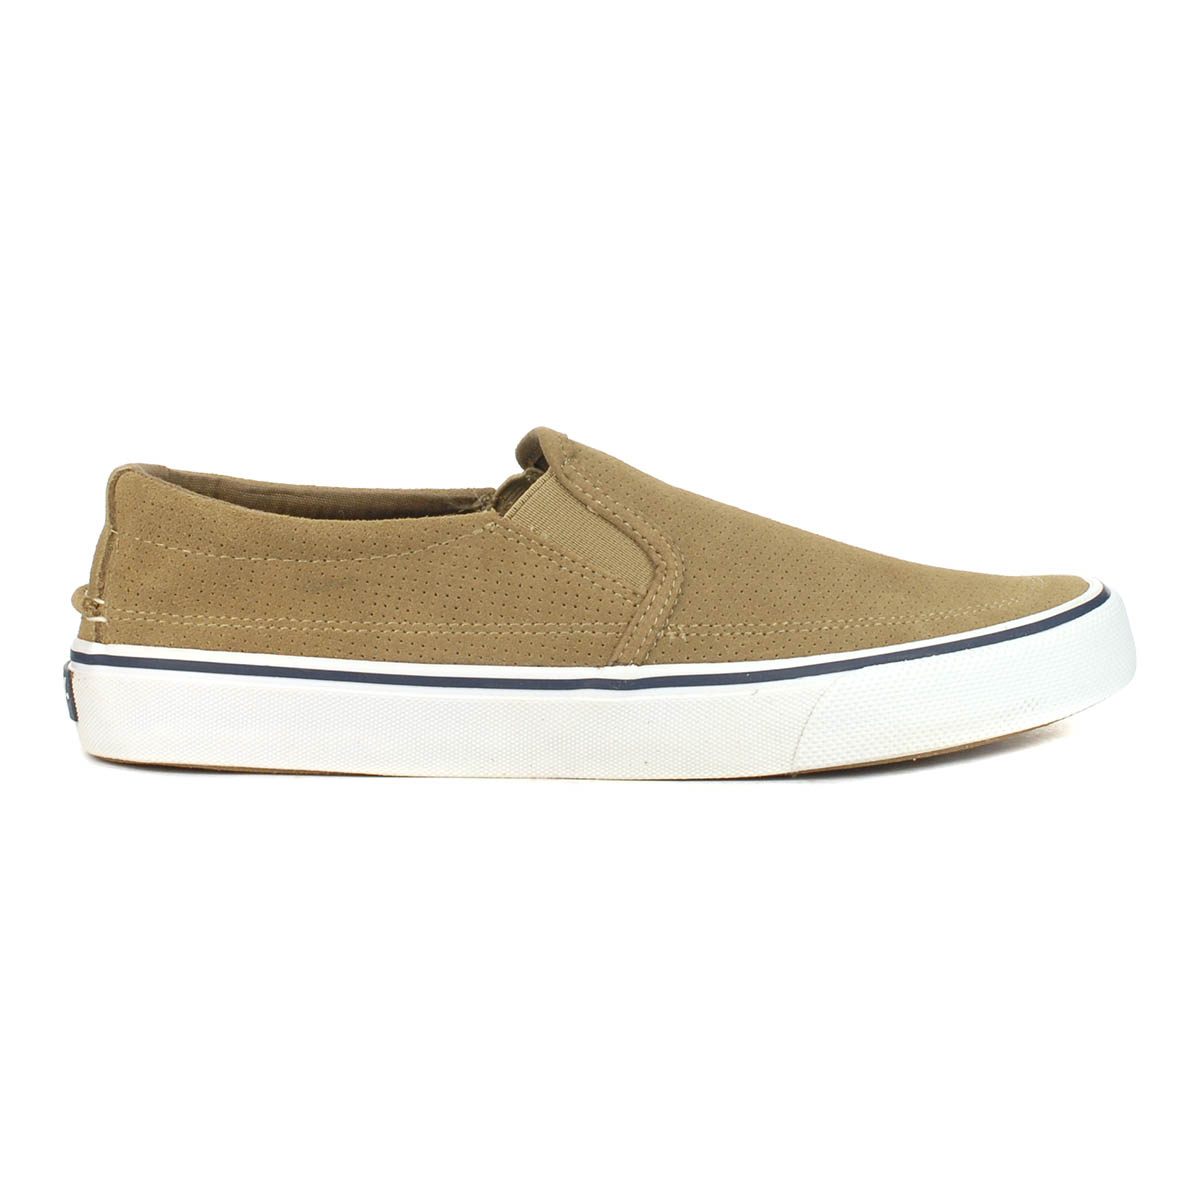 Sperry Men's Striper II Twin Gore Taupe Perforated Slip-on Sneakers ...